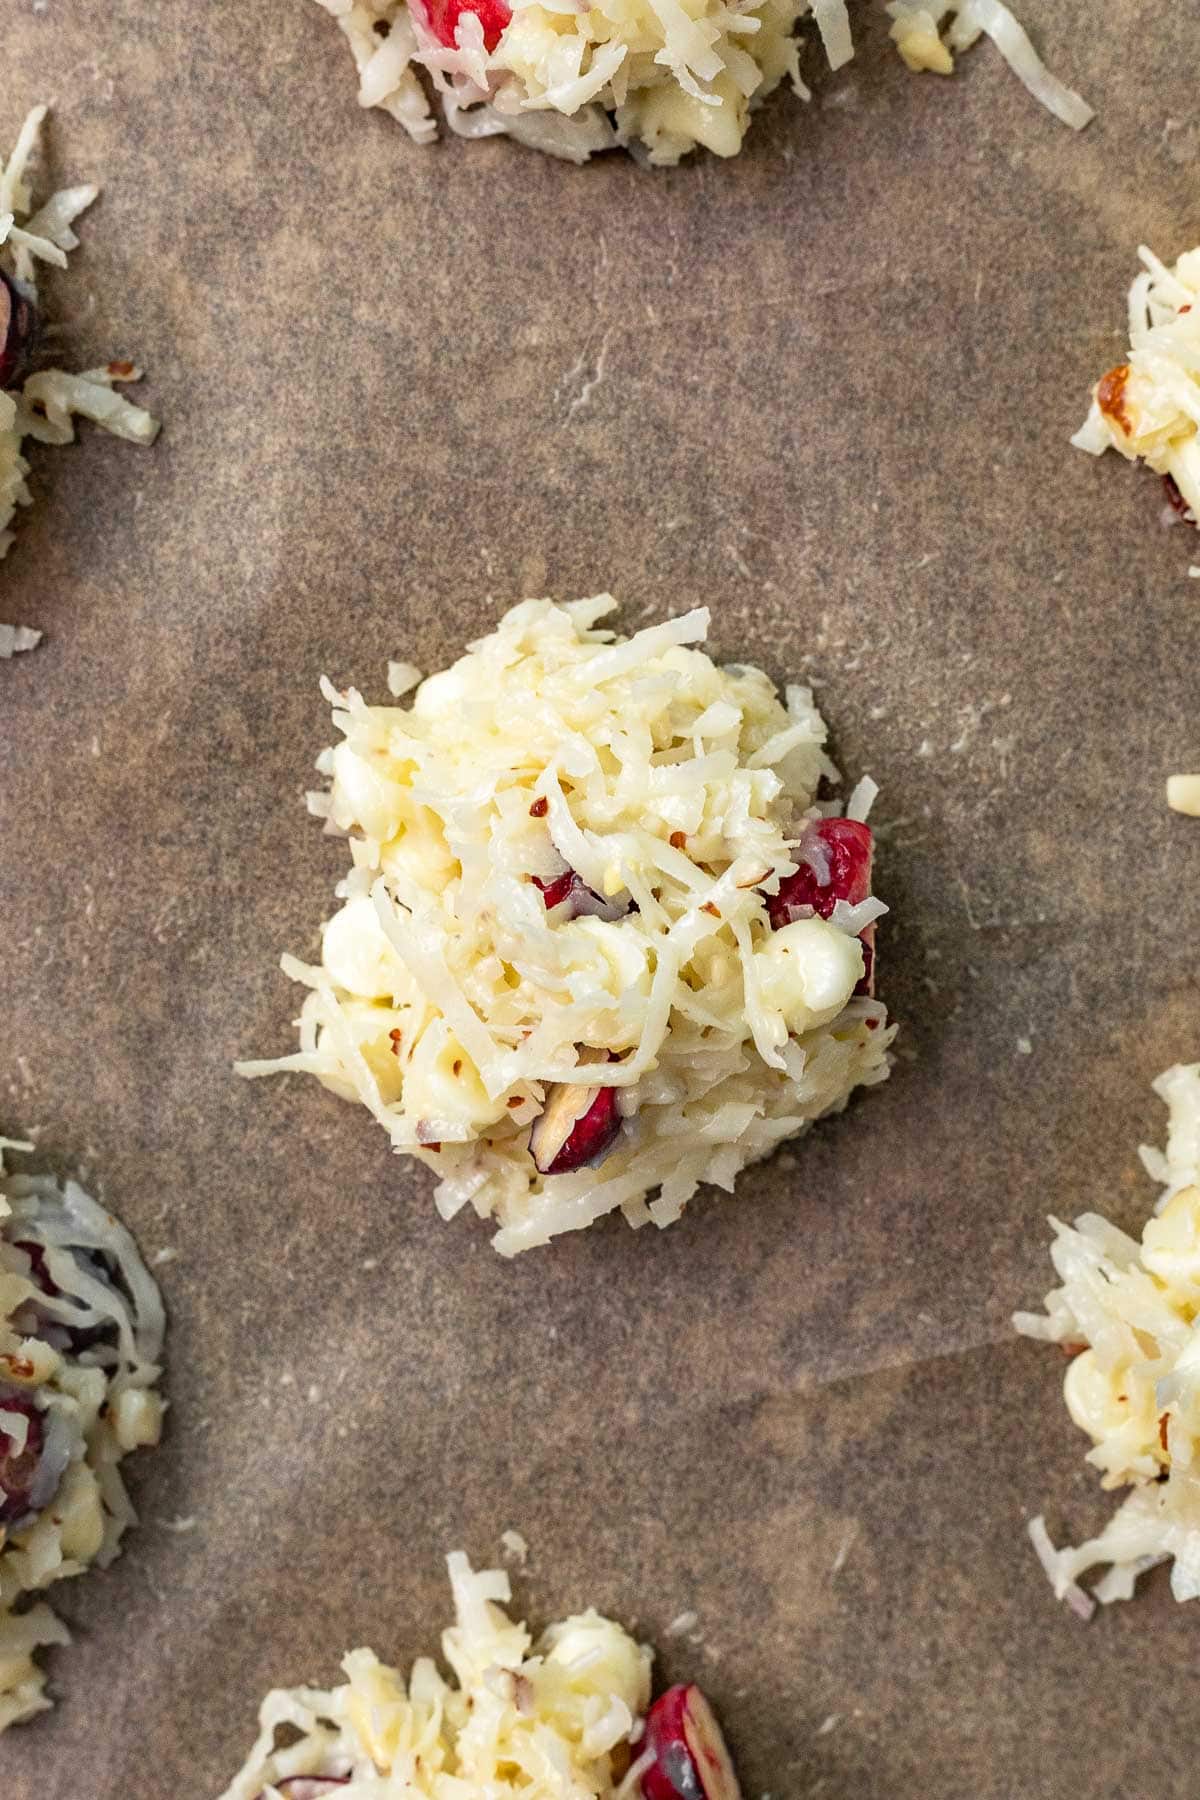 Coconut Cranberry Yummies on baking sheet before baking